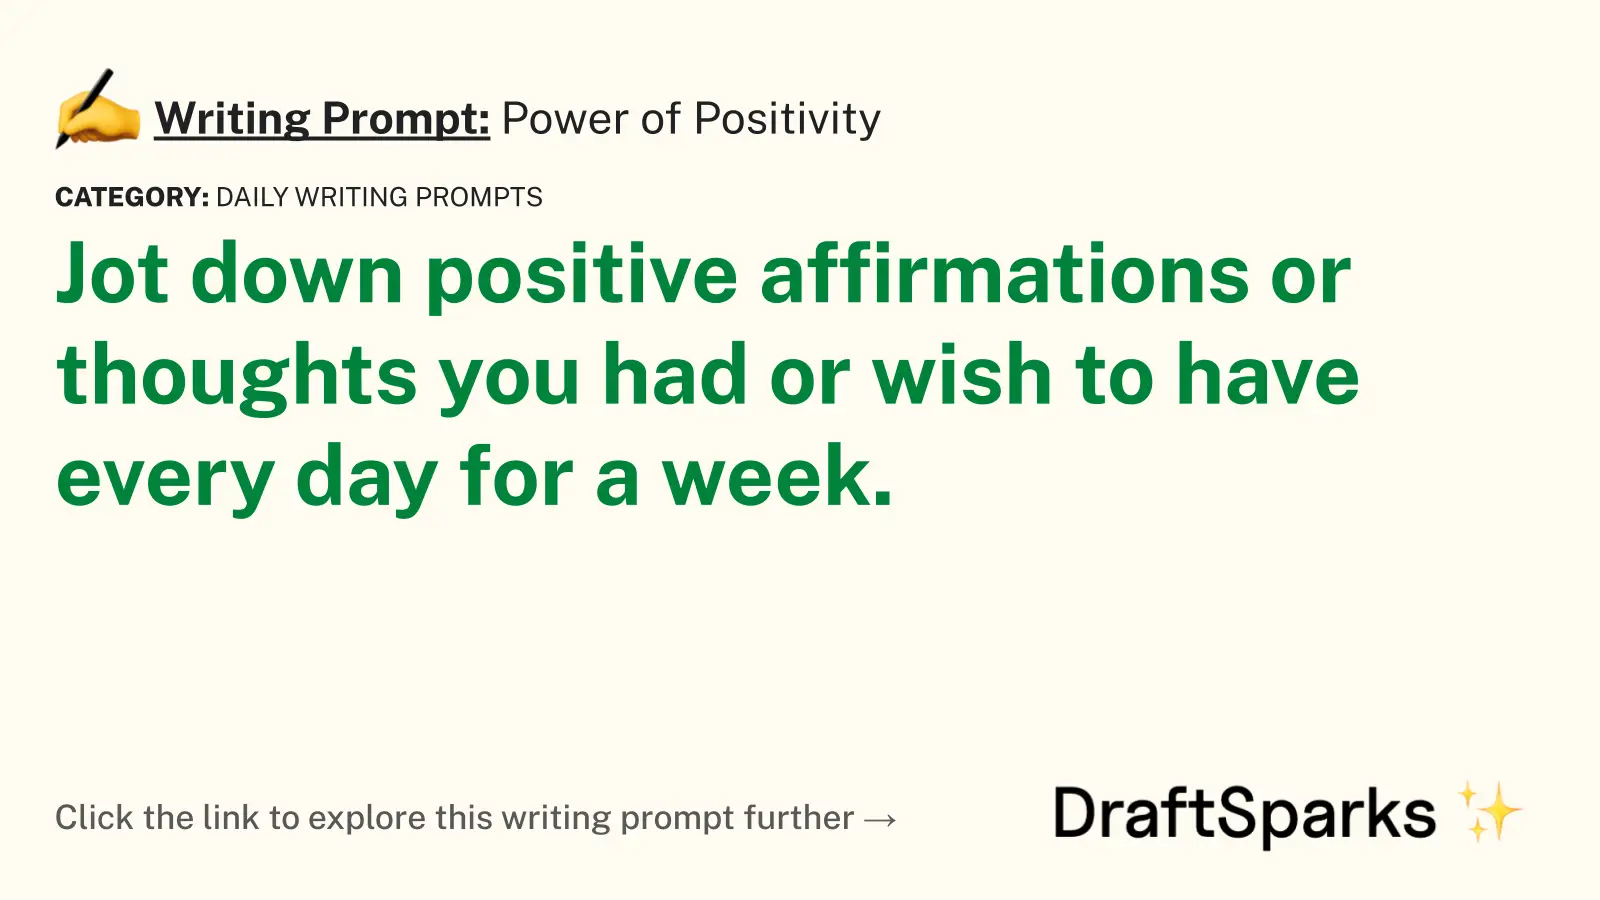 Writing Prompt: Power of Positivity • DraftSparks